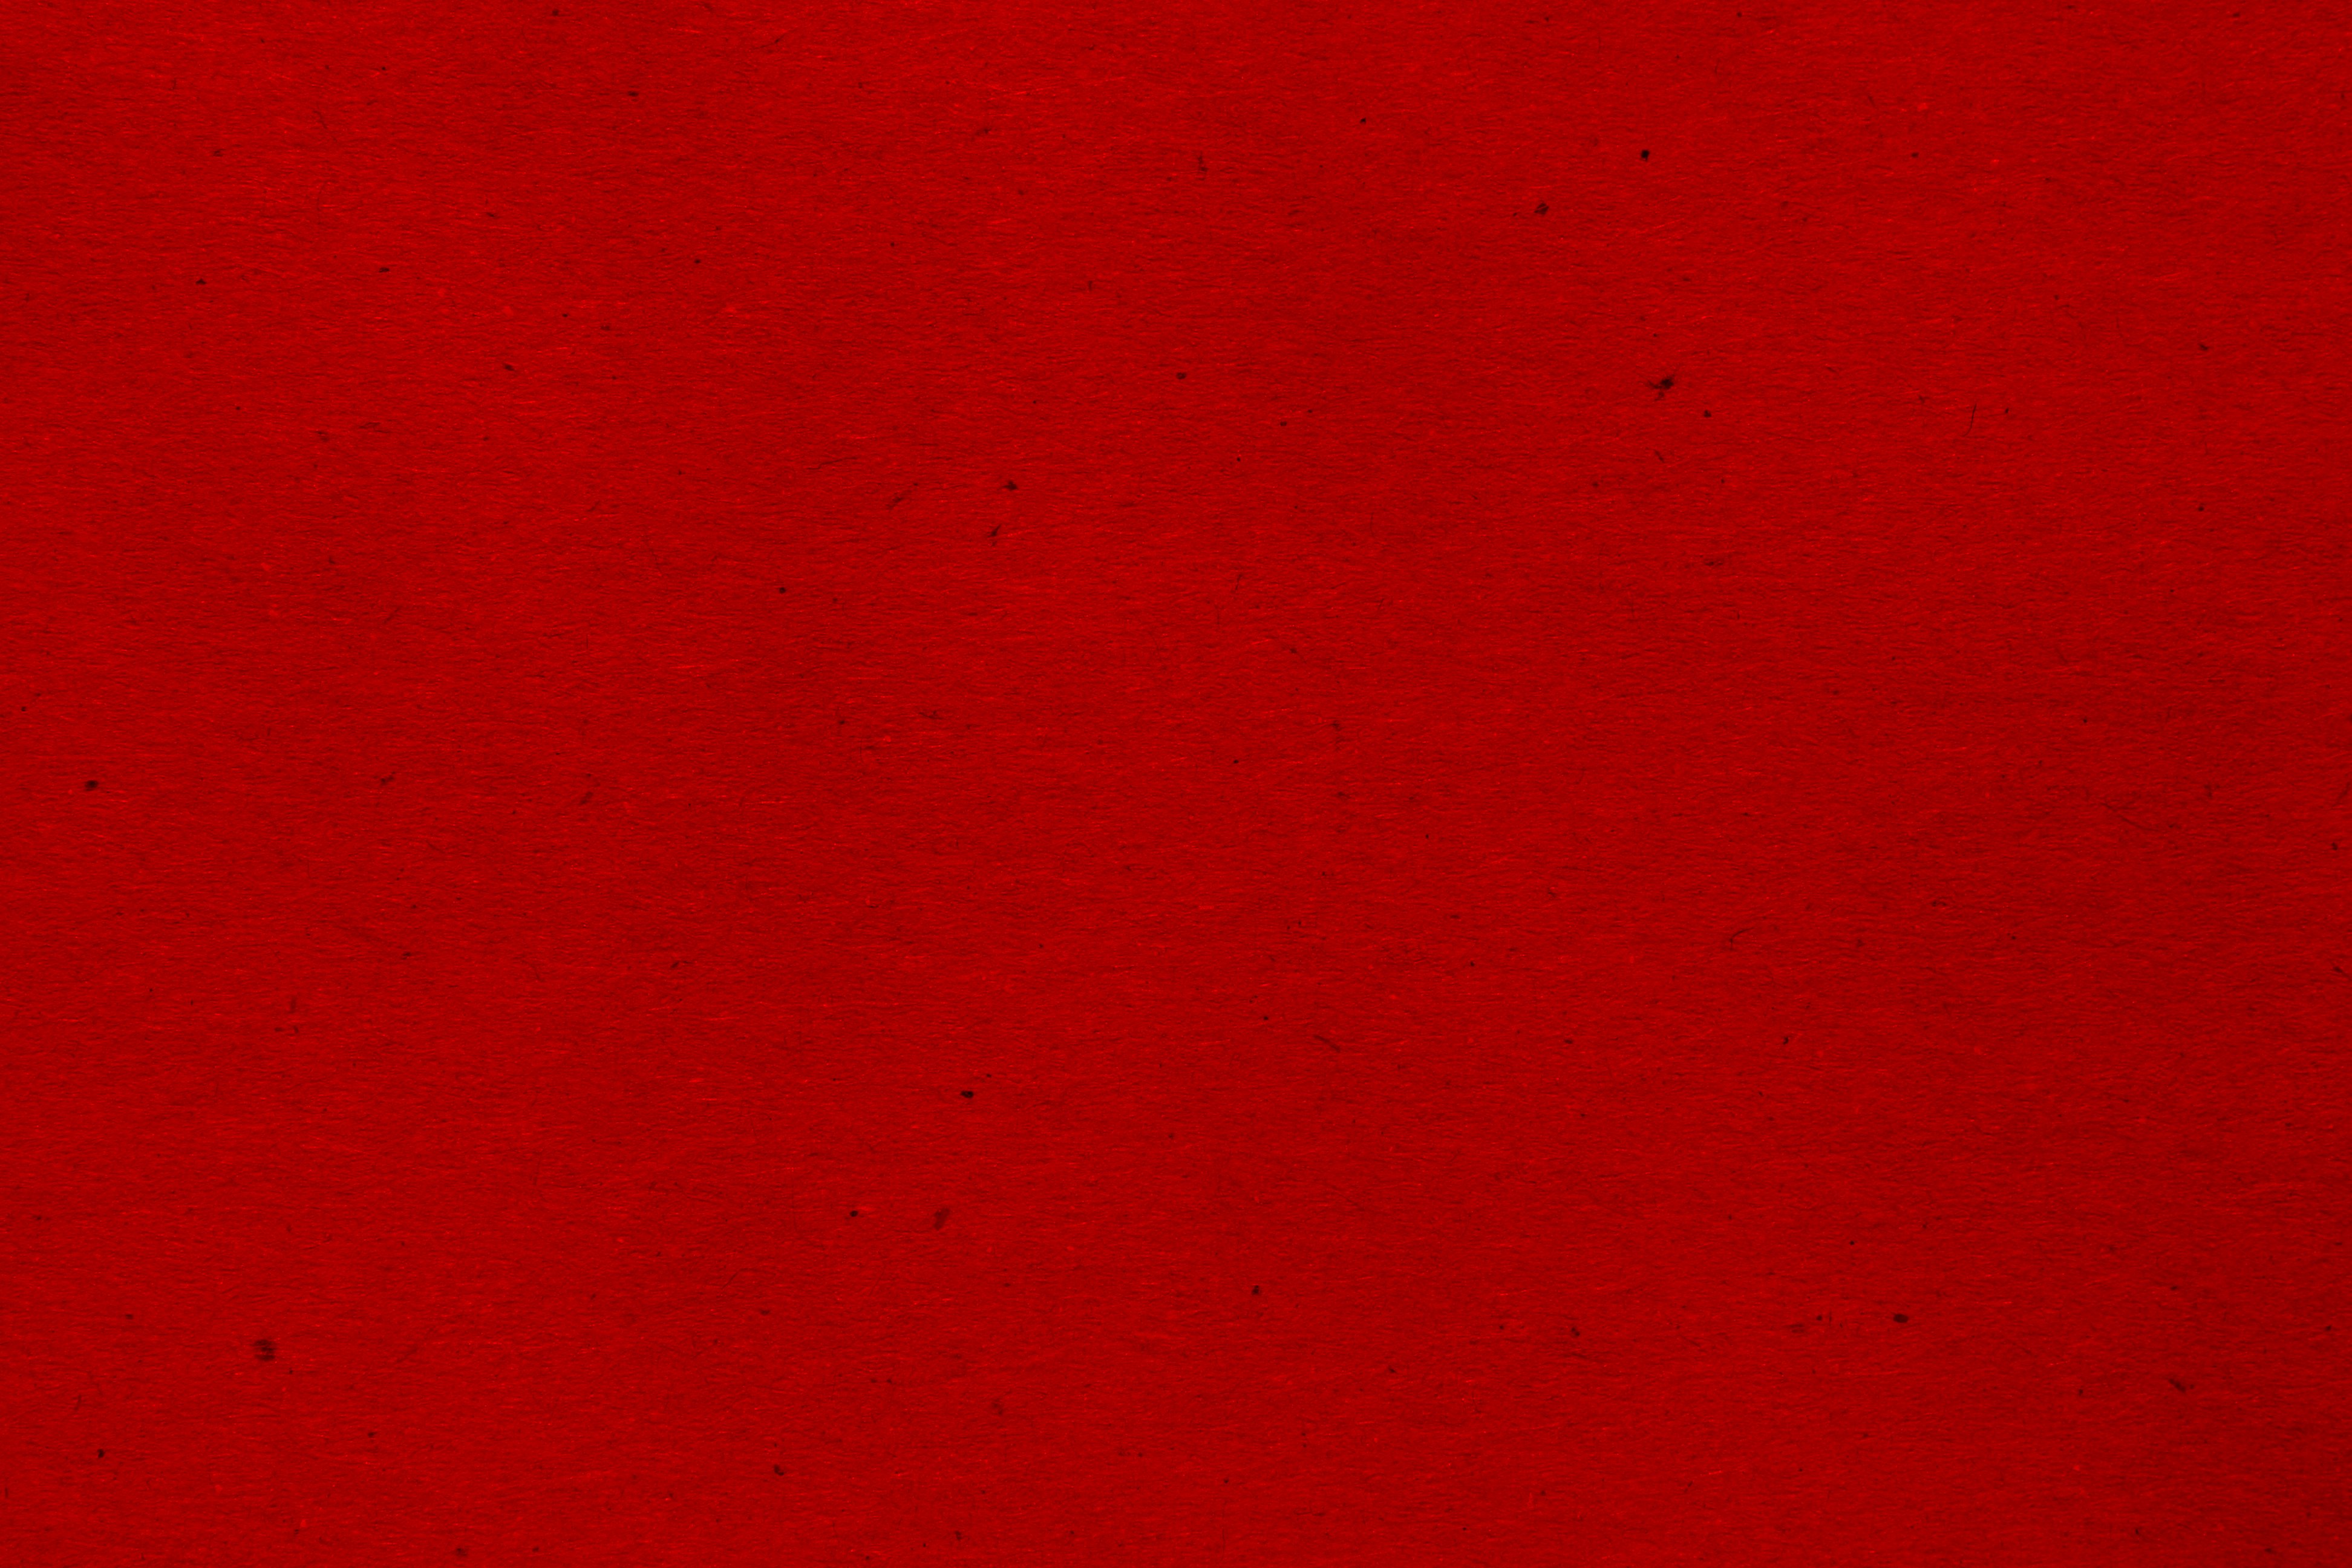 Deep Red Paper Texture with Flecks Picture | Free Photograph ...